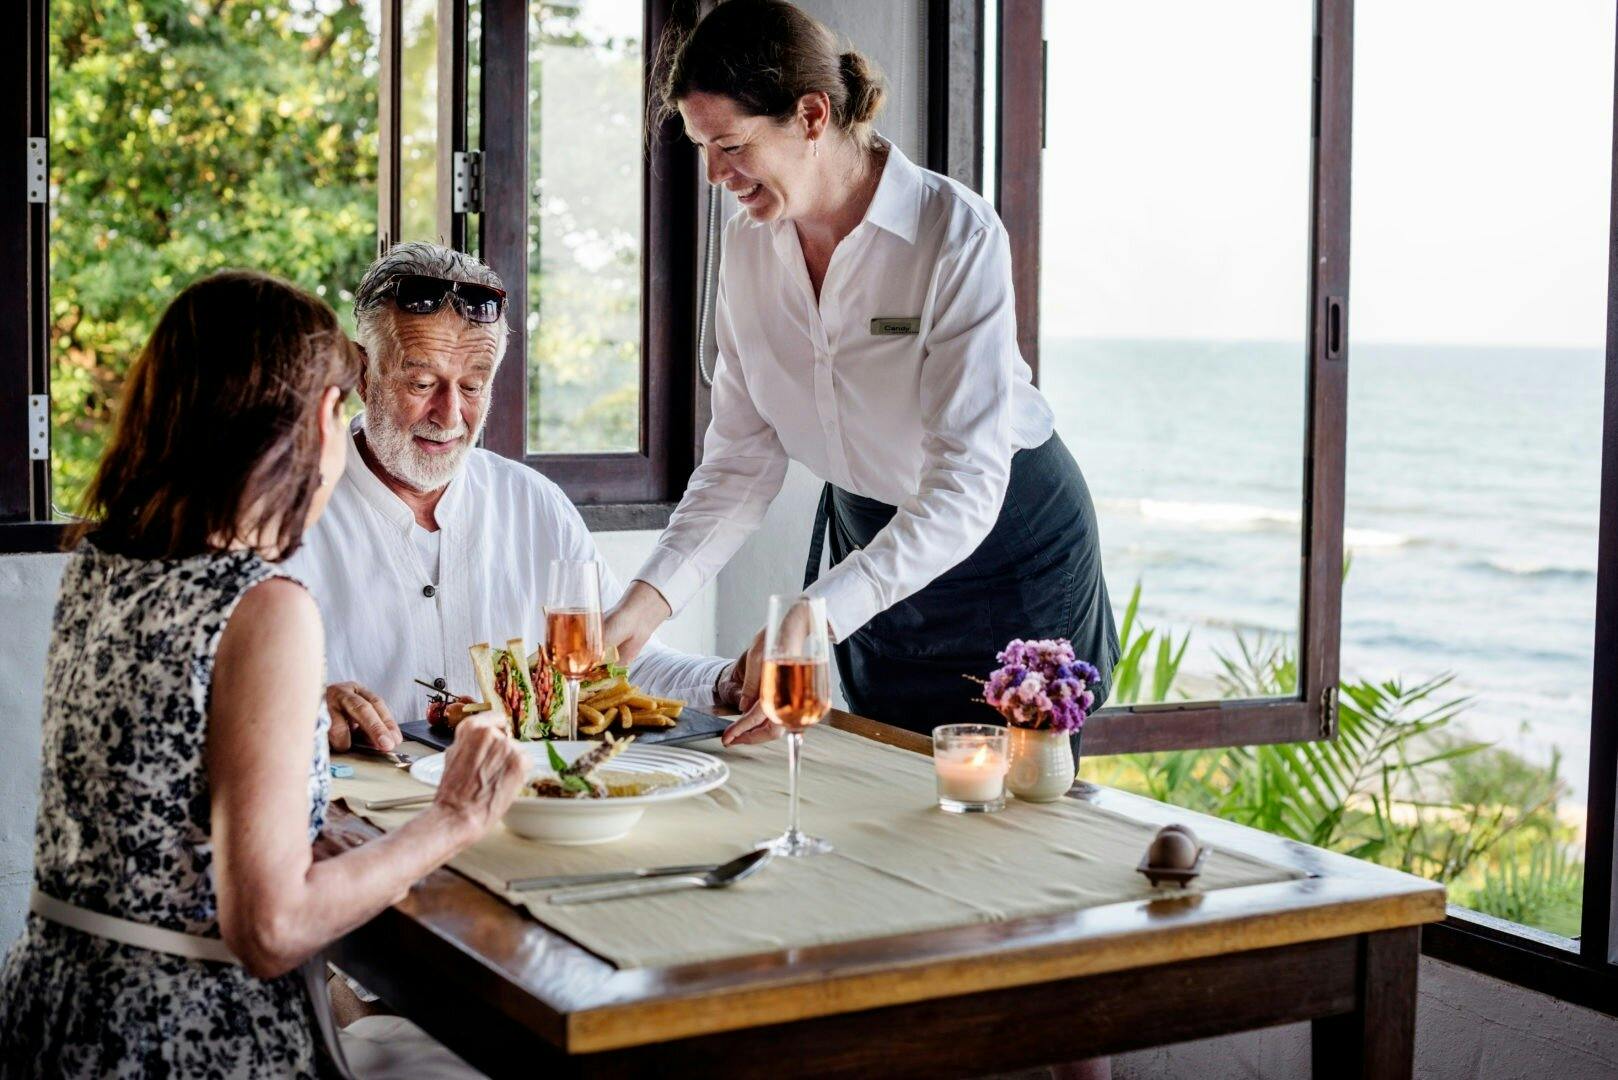 UK’s Leading Hotels Fail to Hit Five Stars When it Comes to Managing Their F&B Guest Relationships